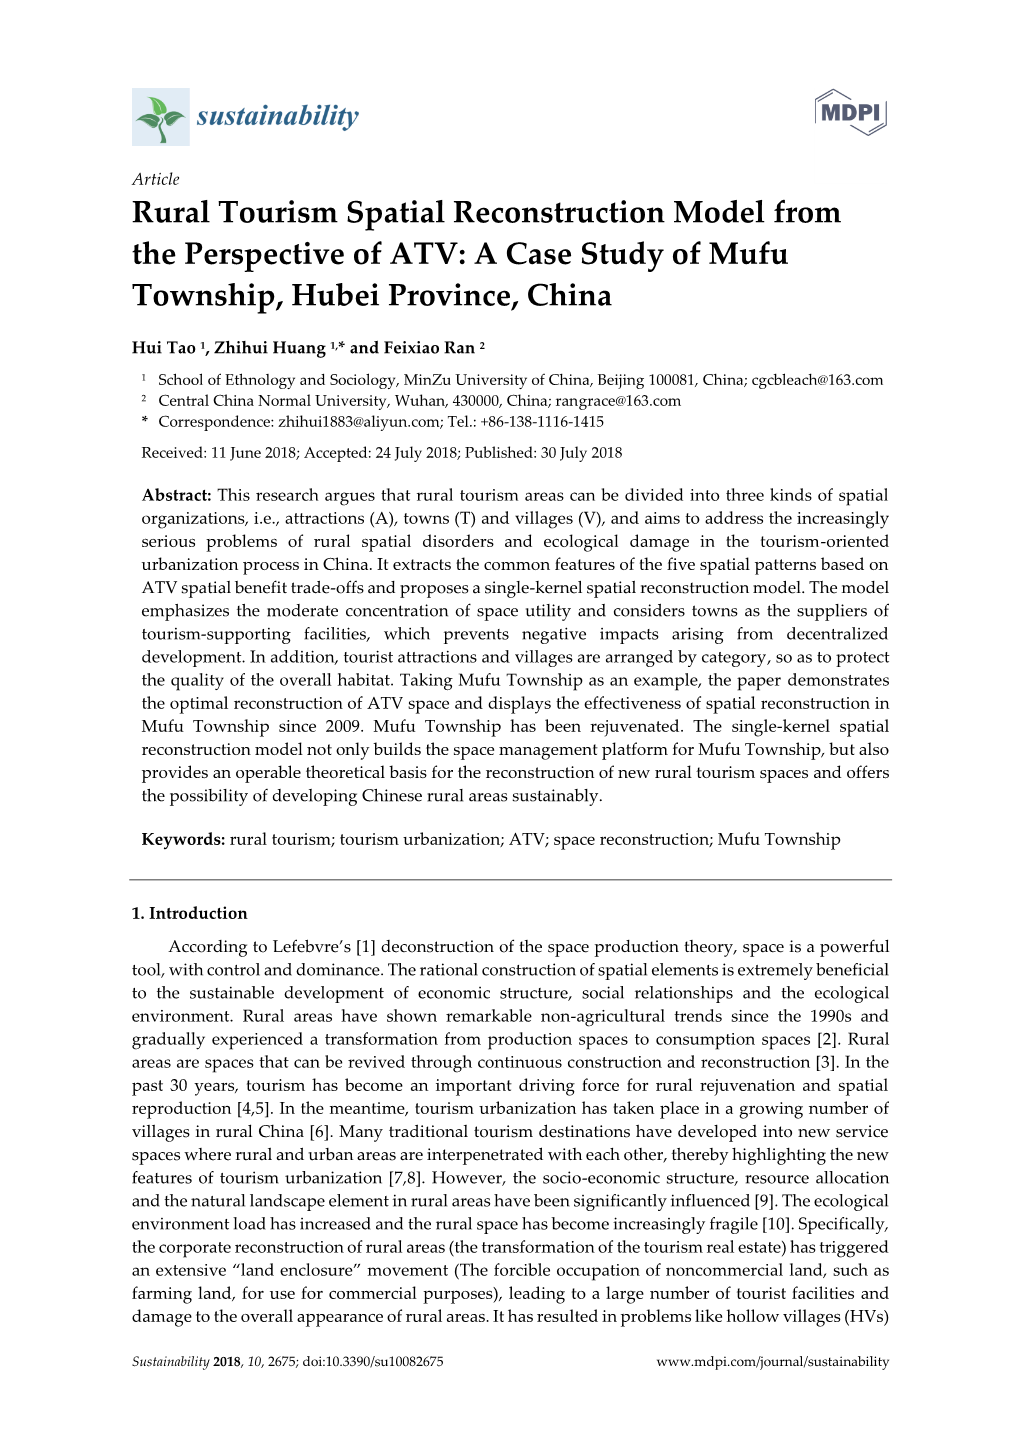 Rural Tourism Spatial Reconstruction Model from the Perspective of ATV: a Case Study of Mufu Township, Hubei Province, China